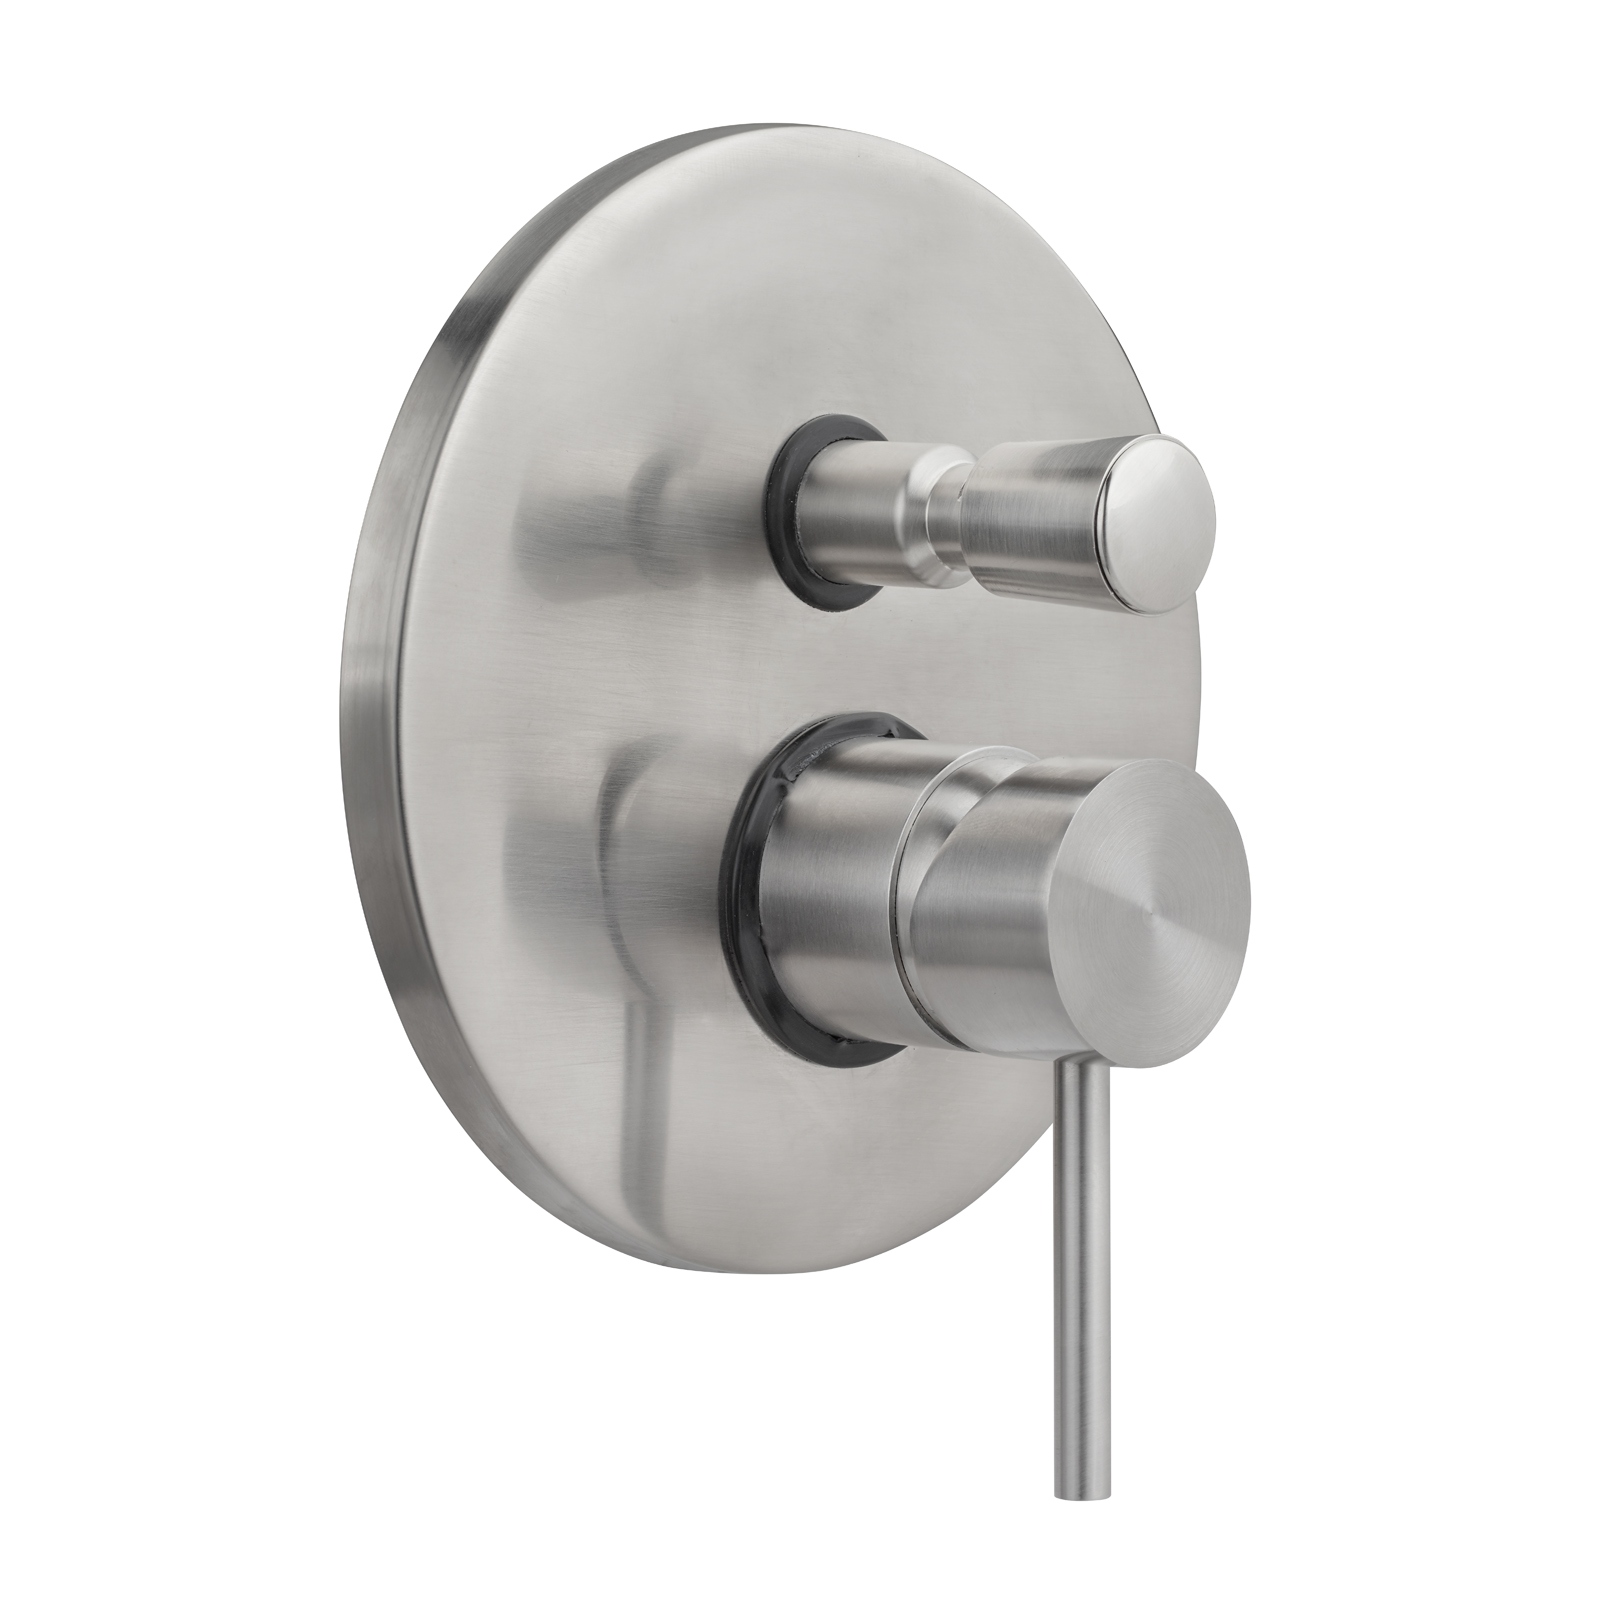 Built-in single control mixer for shower with diverter